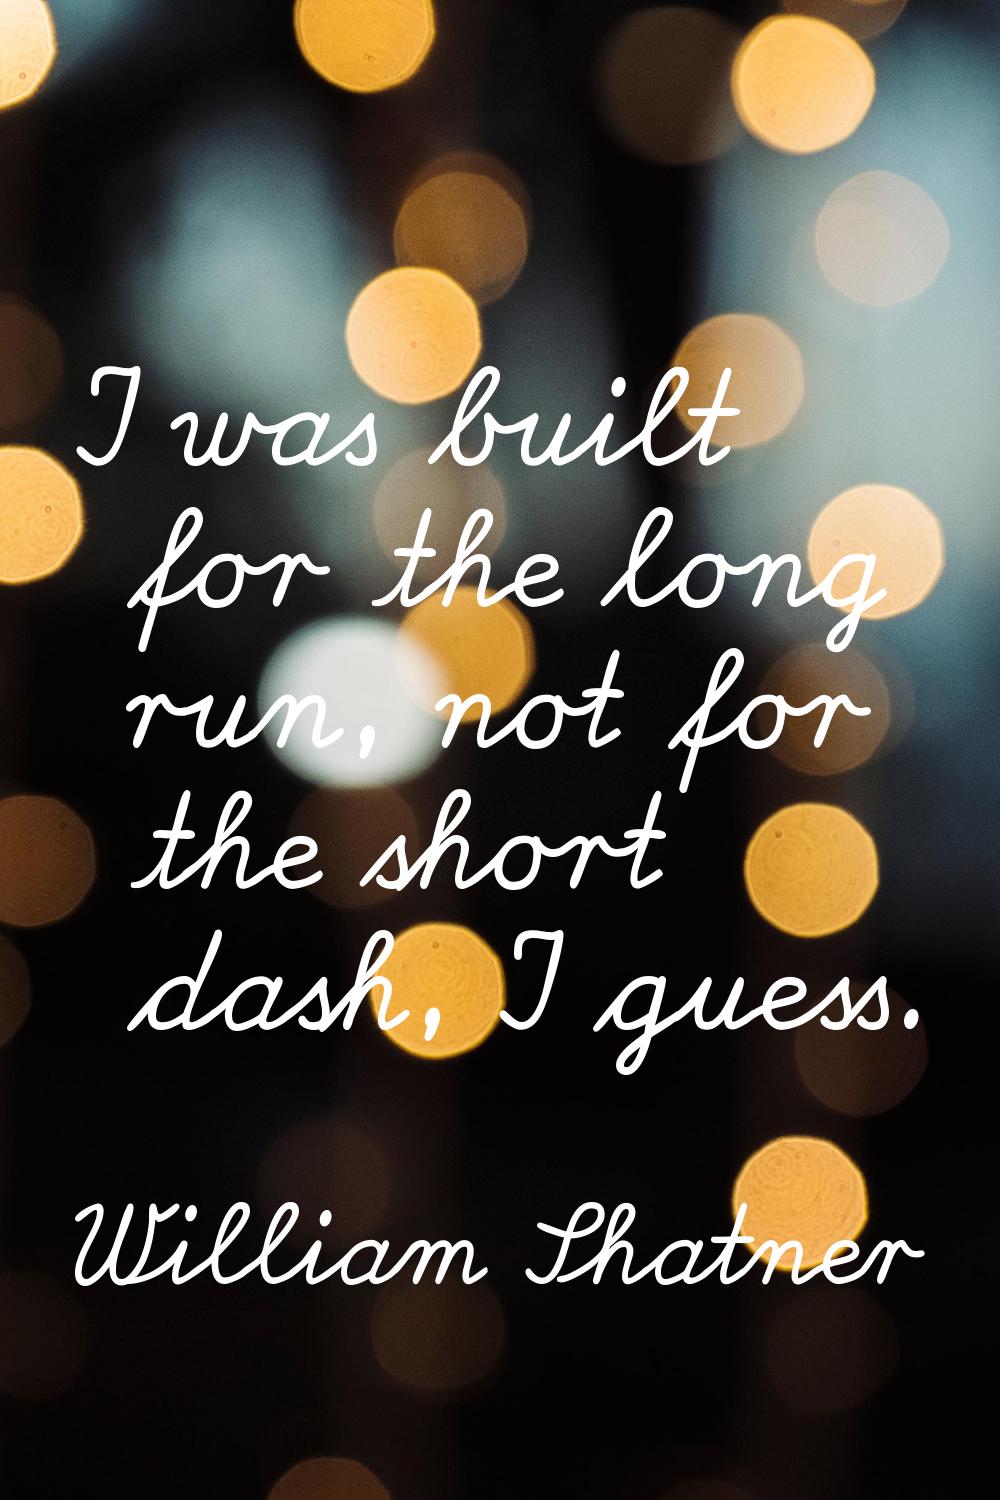 I was built for the long run, not for the short dash, I guess.